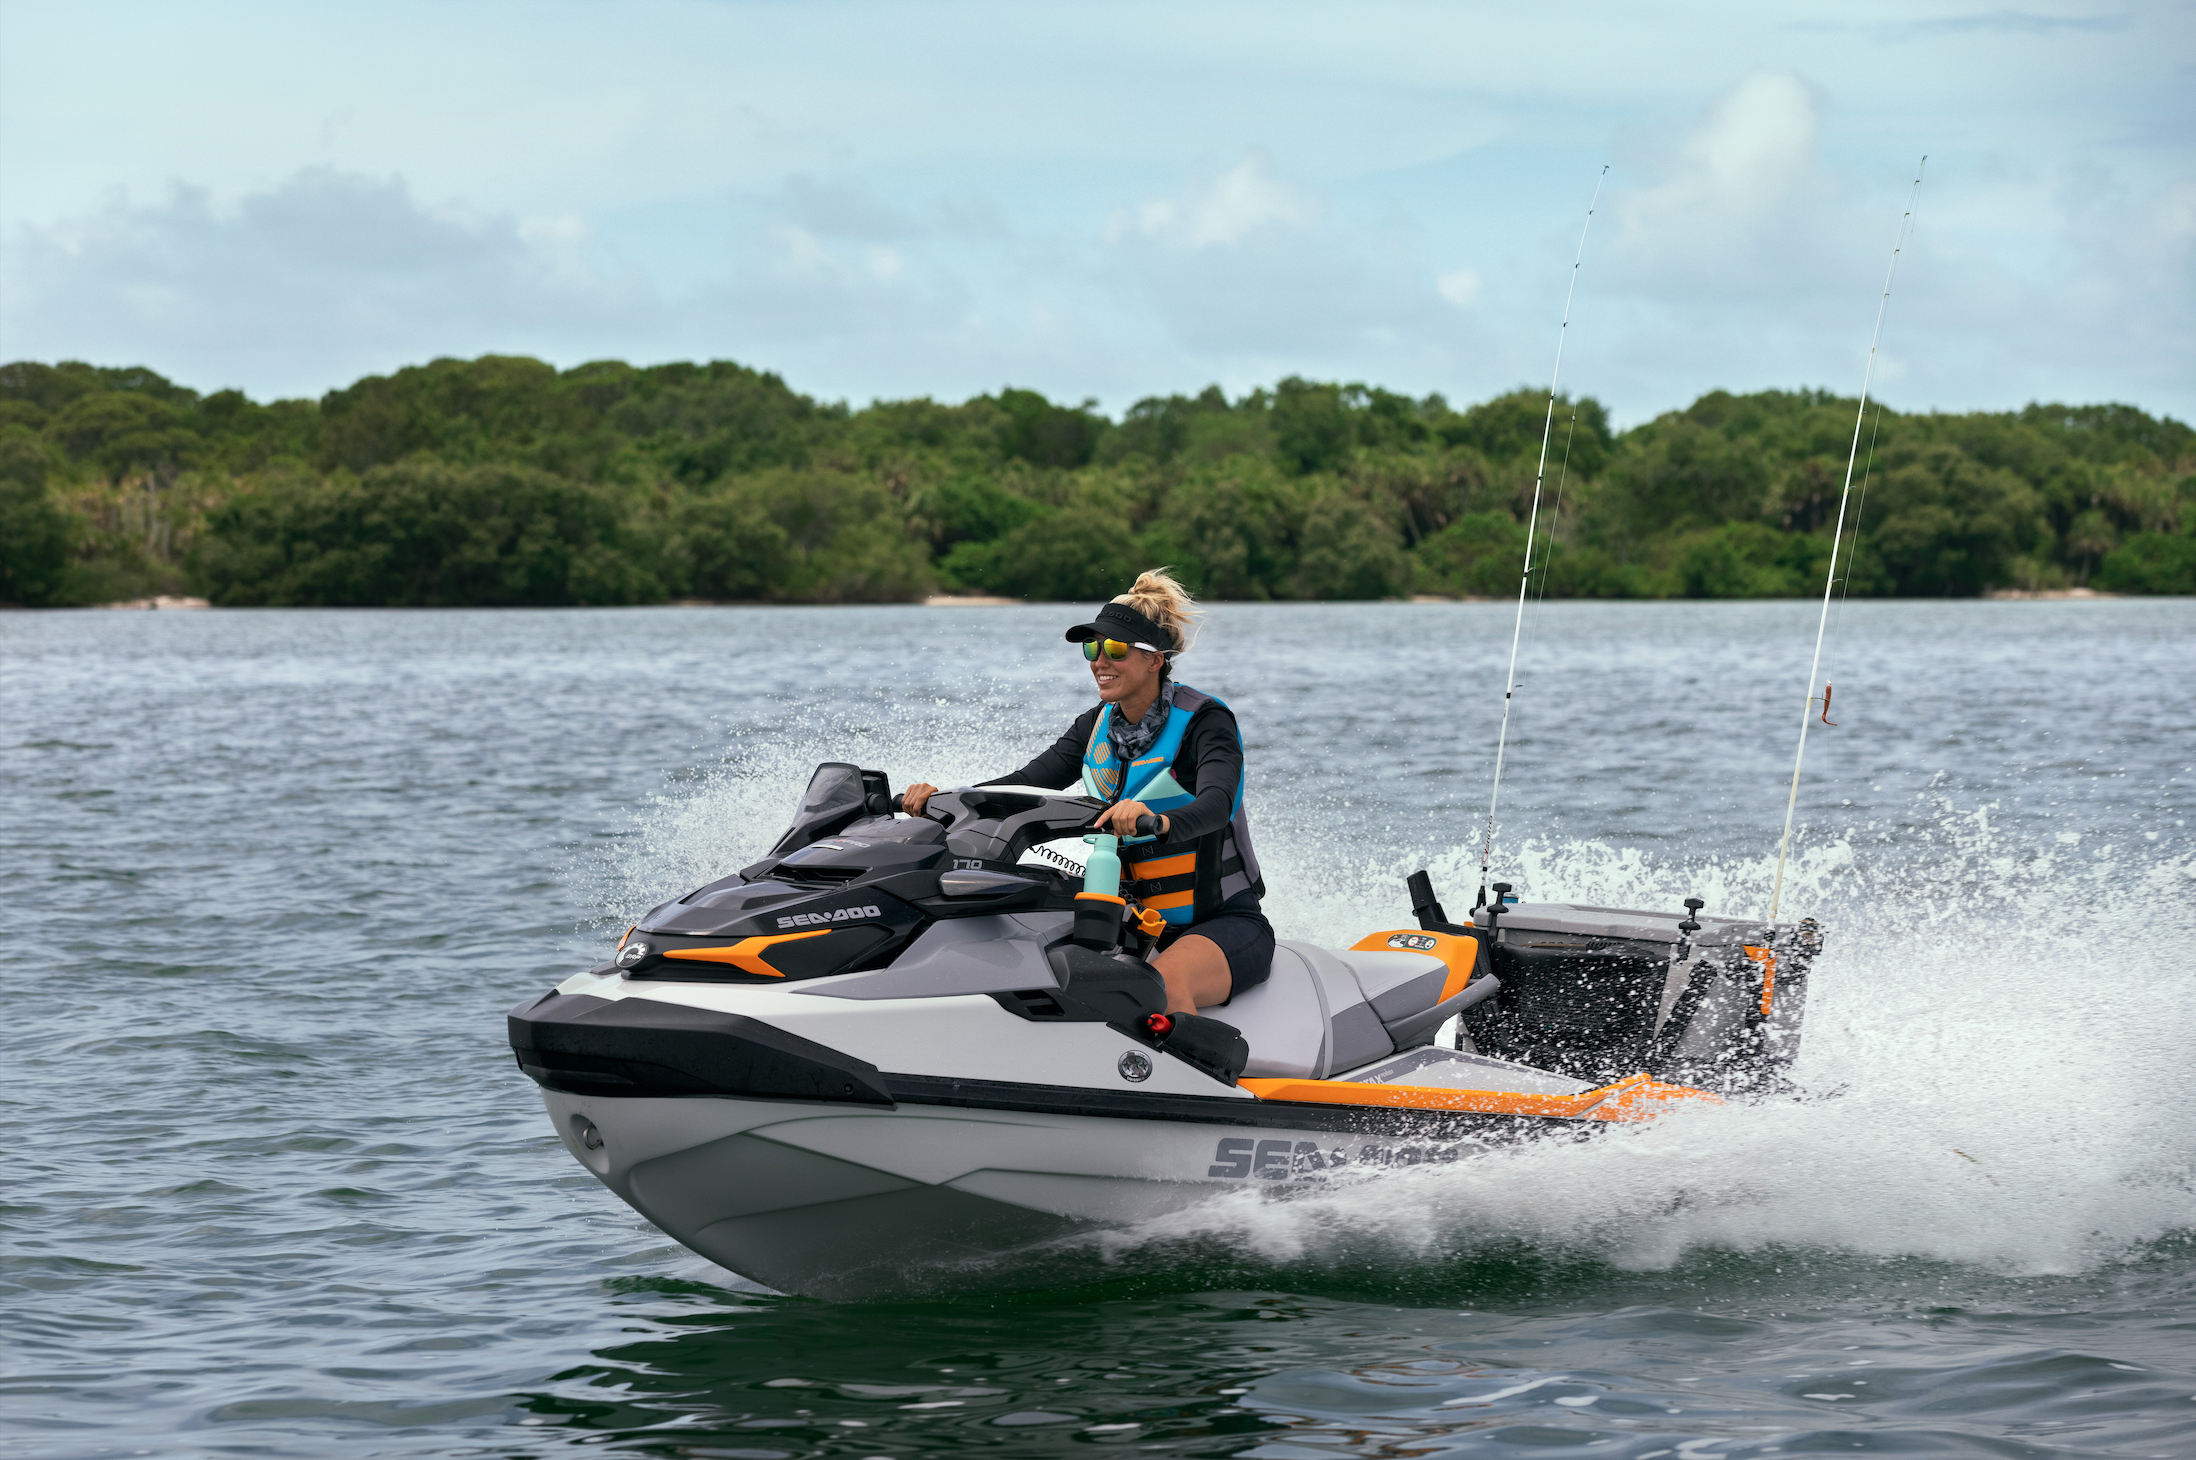 LEVEL UP YOUR FISHING WITH THE ALL-NEW 2022 SEA-DOO FISH PRO FAMILY